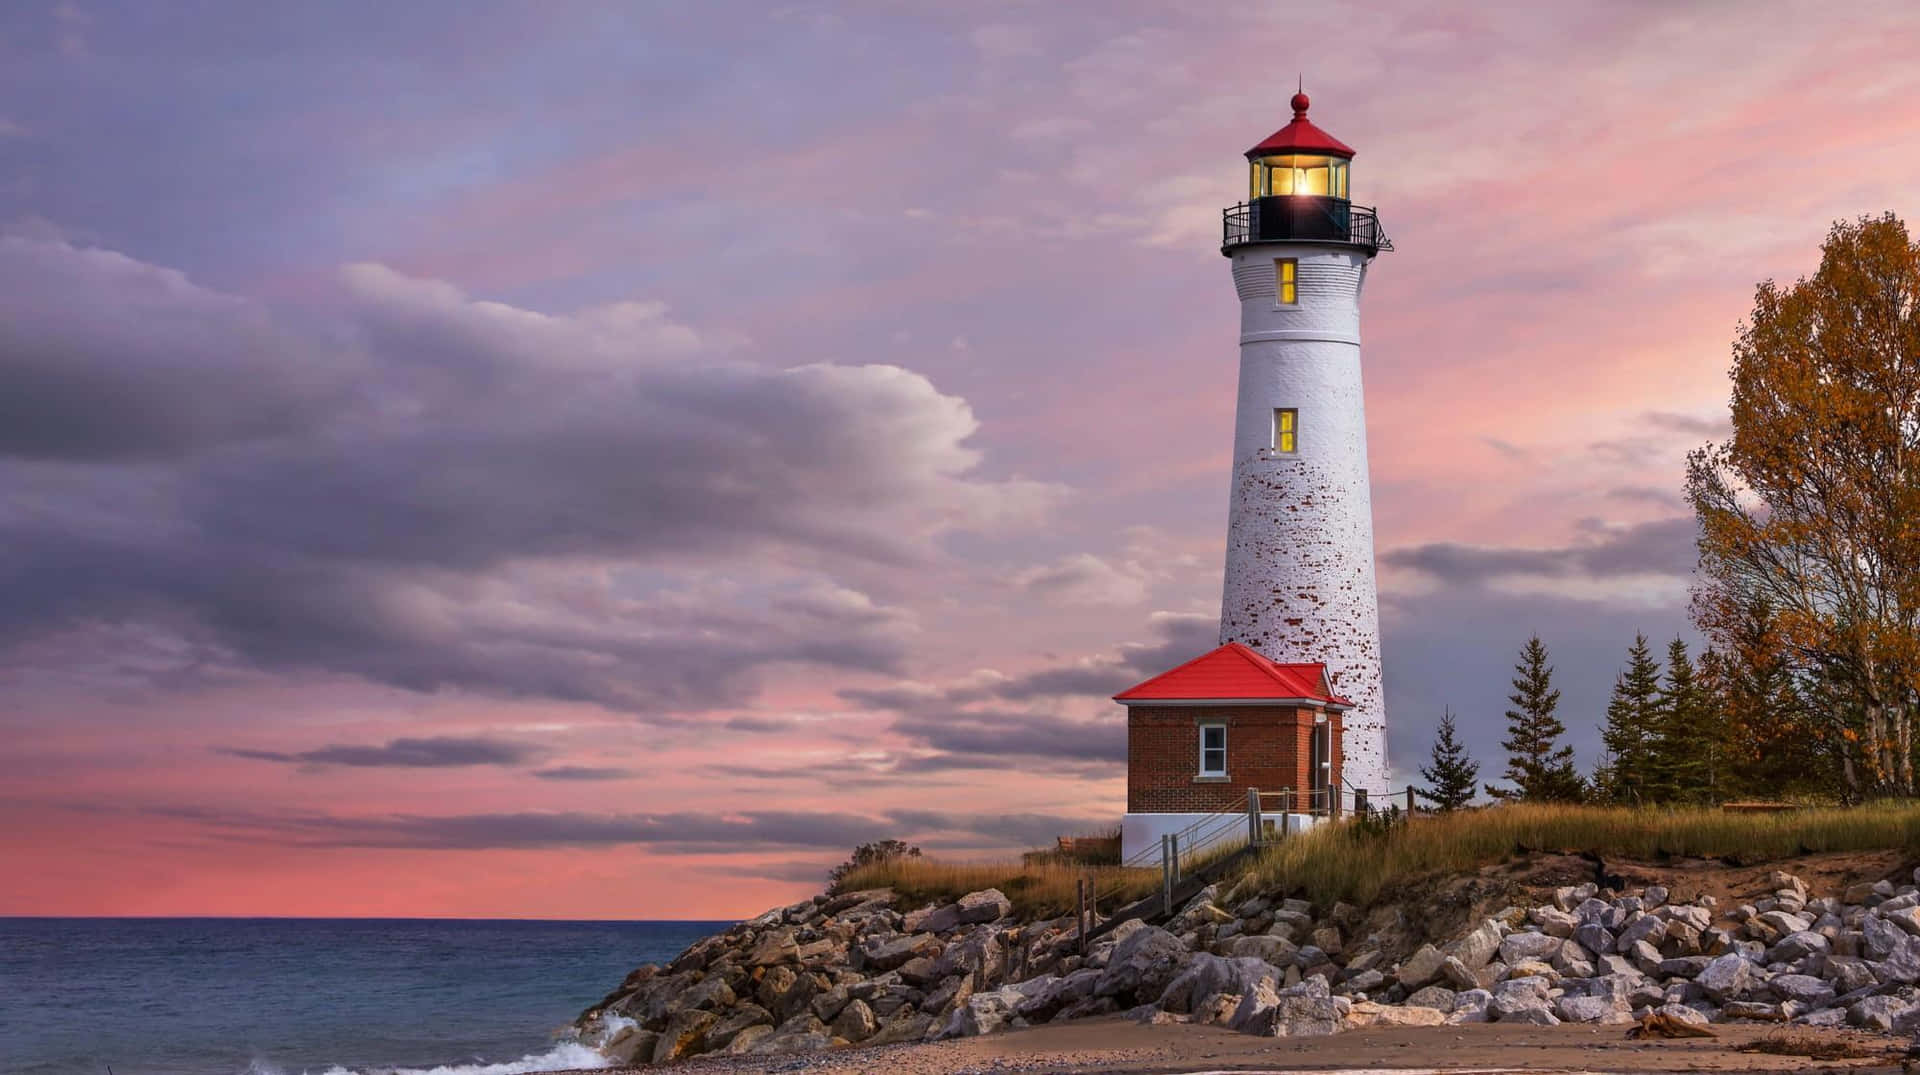 Explore the peaceful beauty of a solitary lighthouse